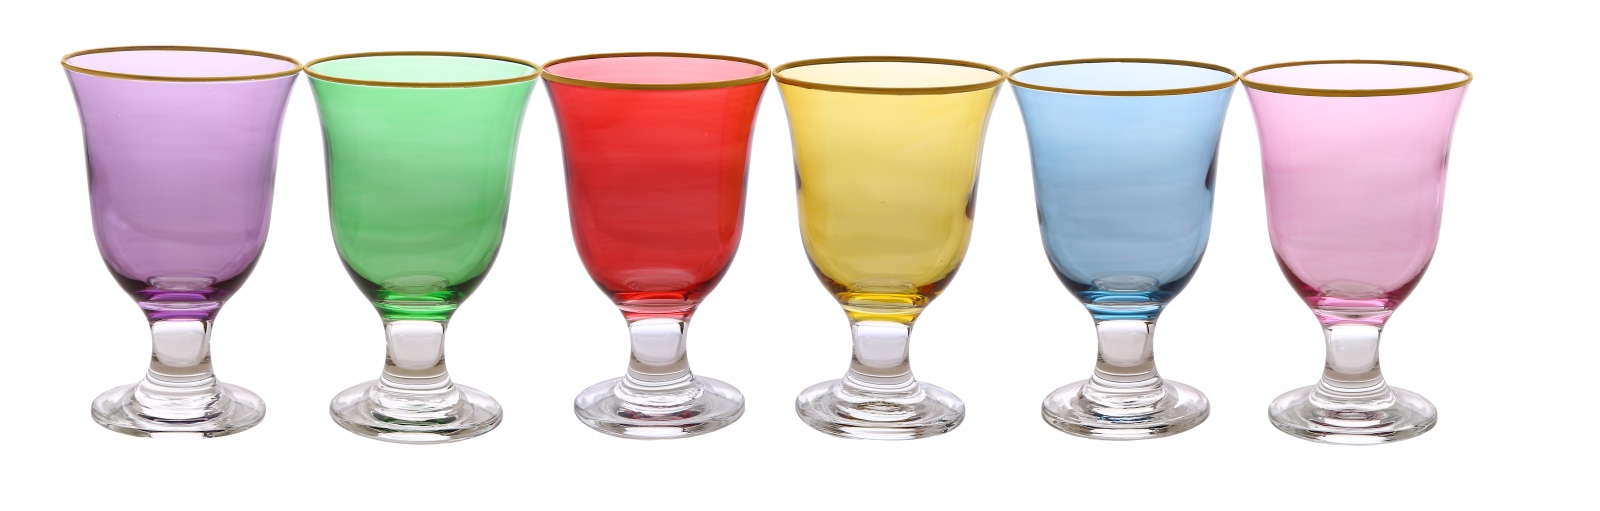 Set of 6 Assorted Colored Short Stem Glasses with Rich Gold Design